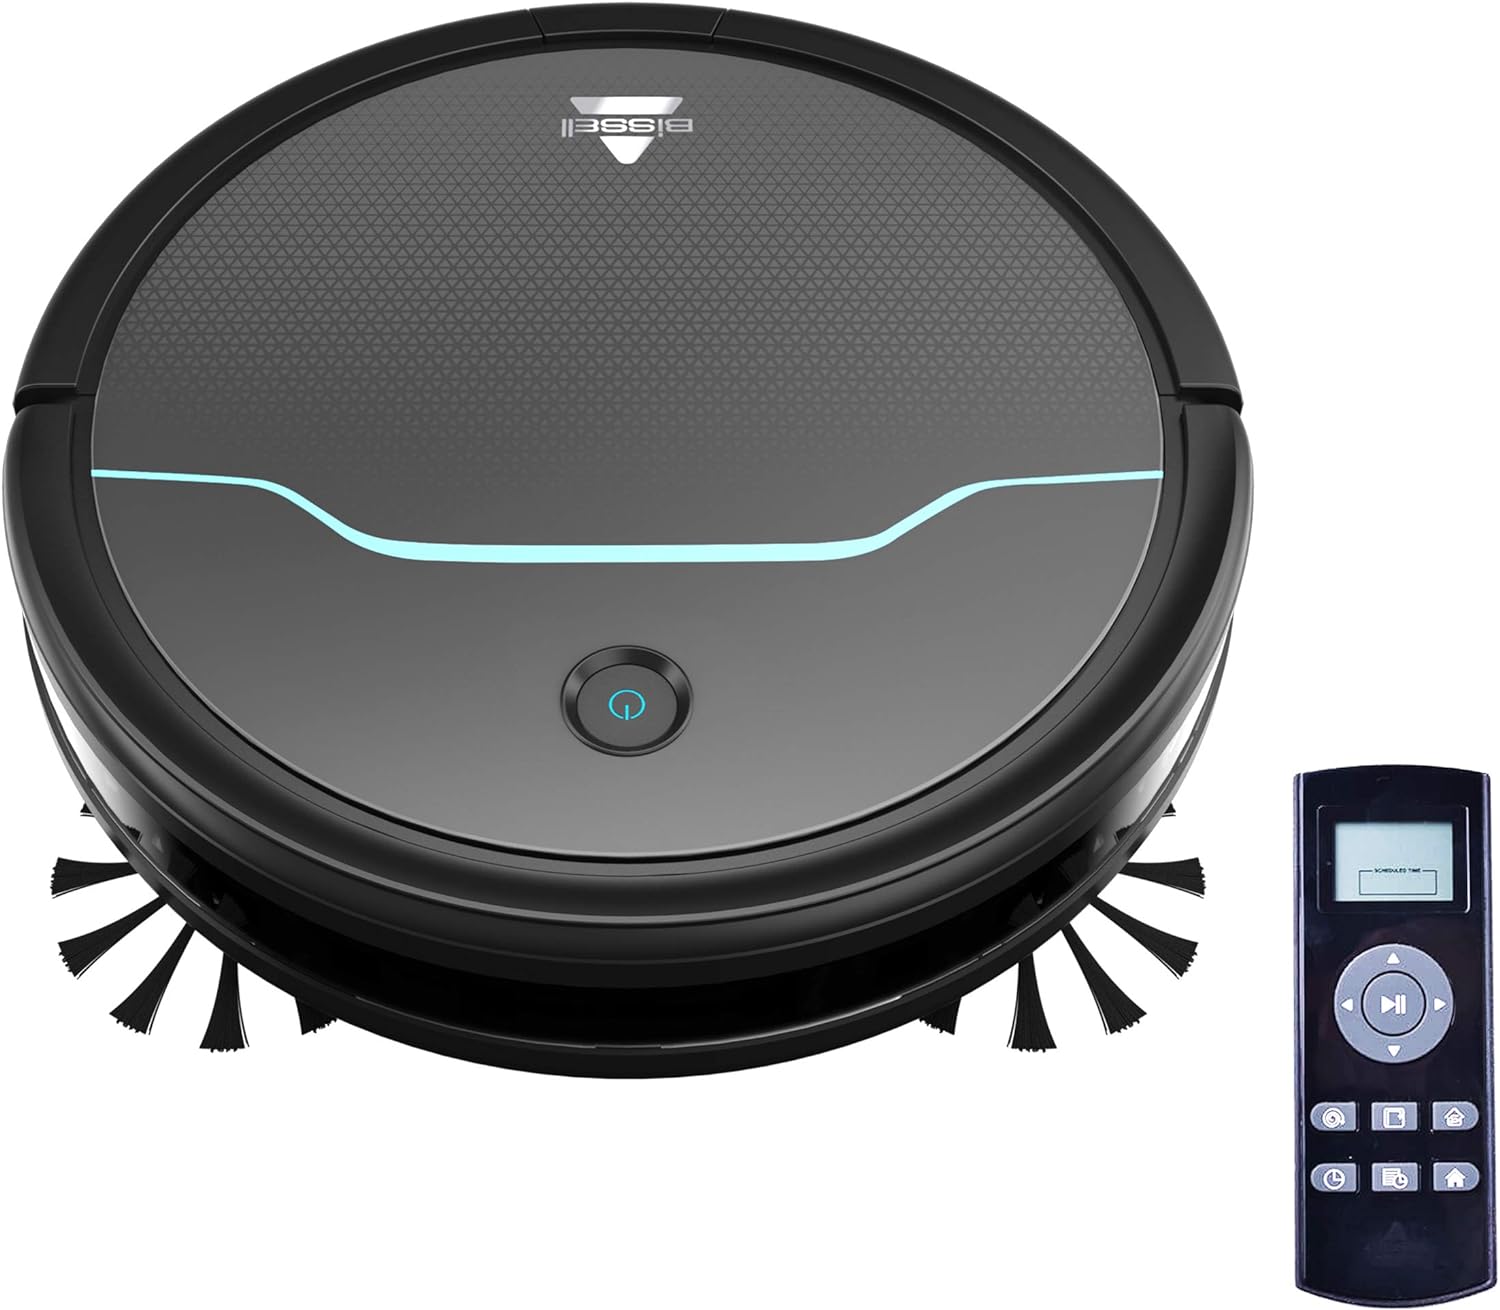 BISSELL EV675 Robot Vacuum Cleaner for Pet Hair with Self Charging Dock, 2503, Black